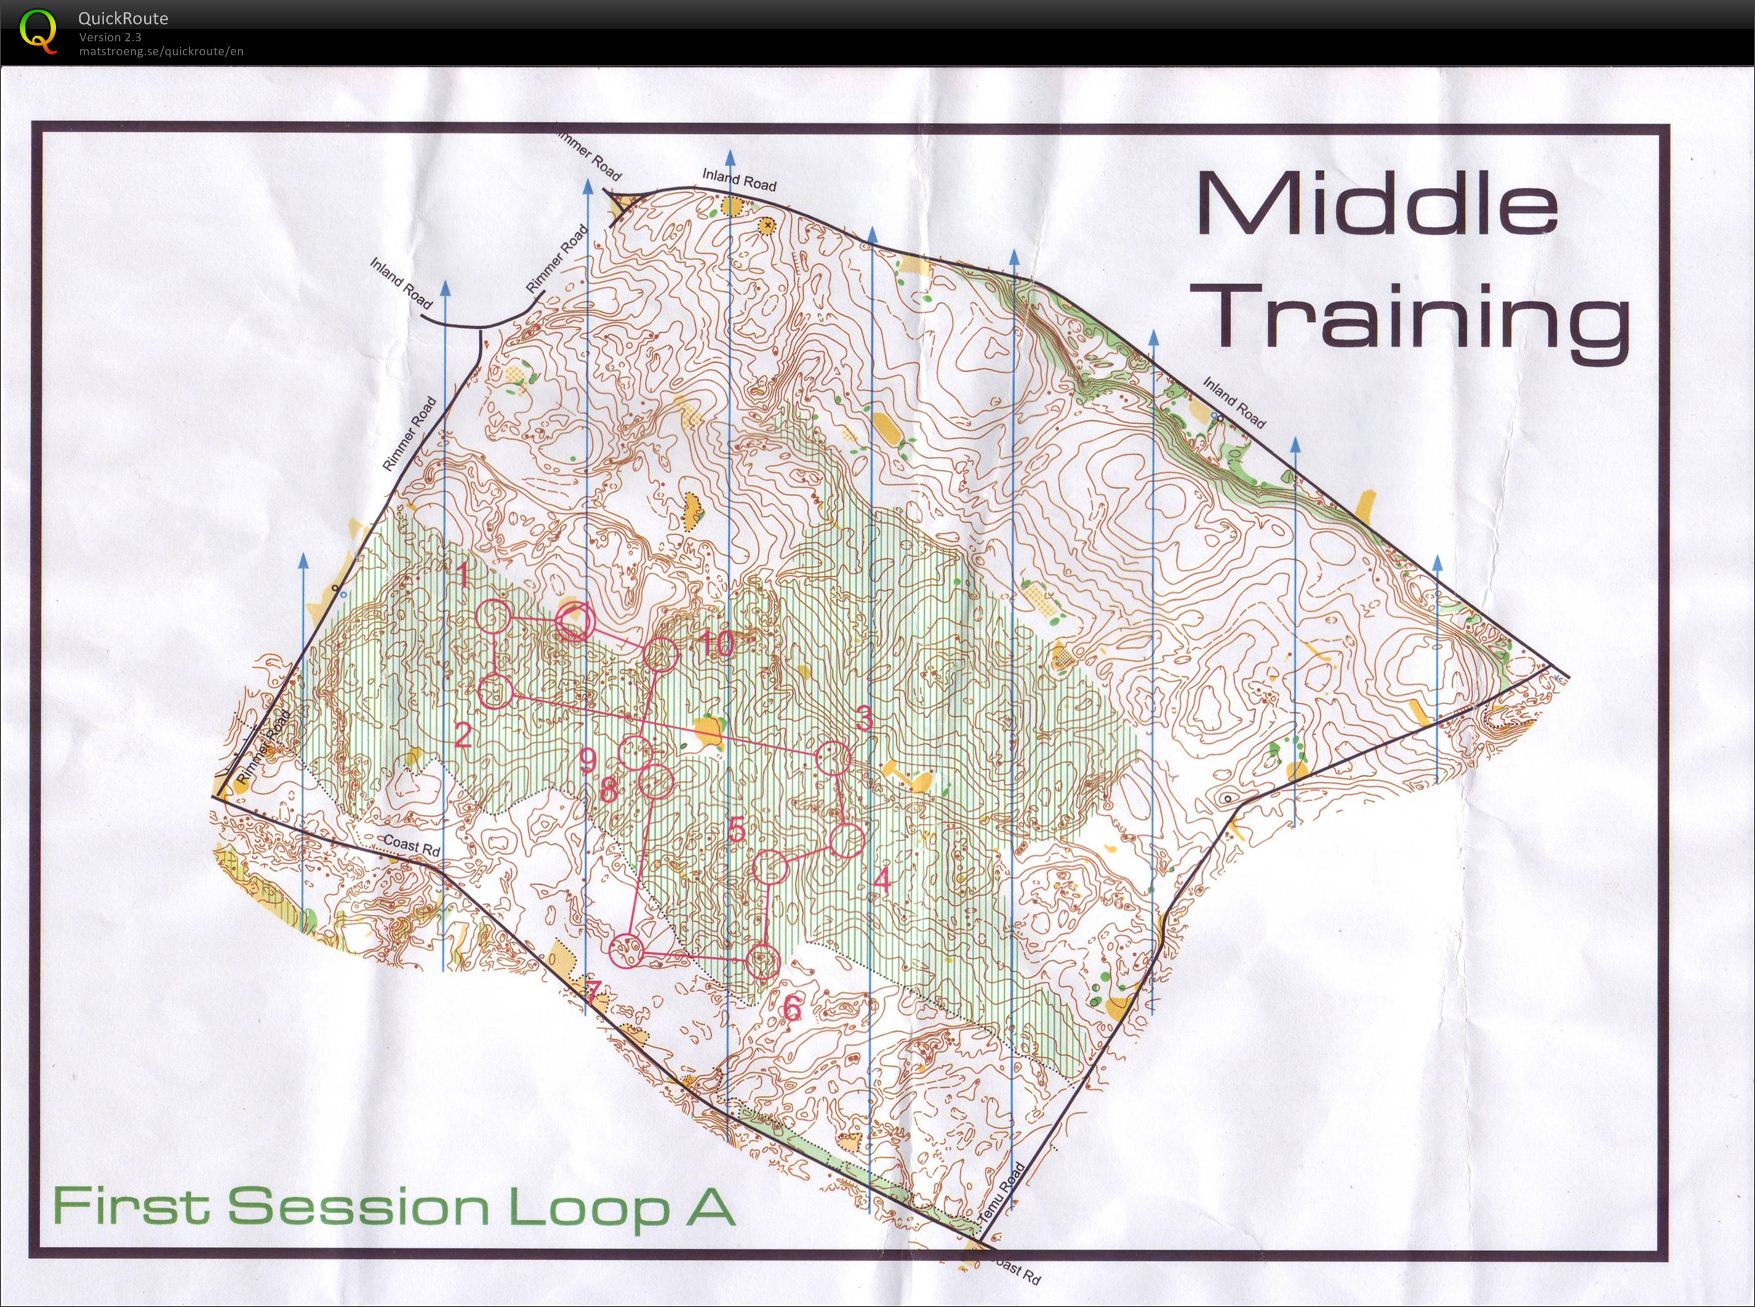 Middle Training - Rimmer Rd (30-03-2012)